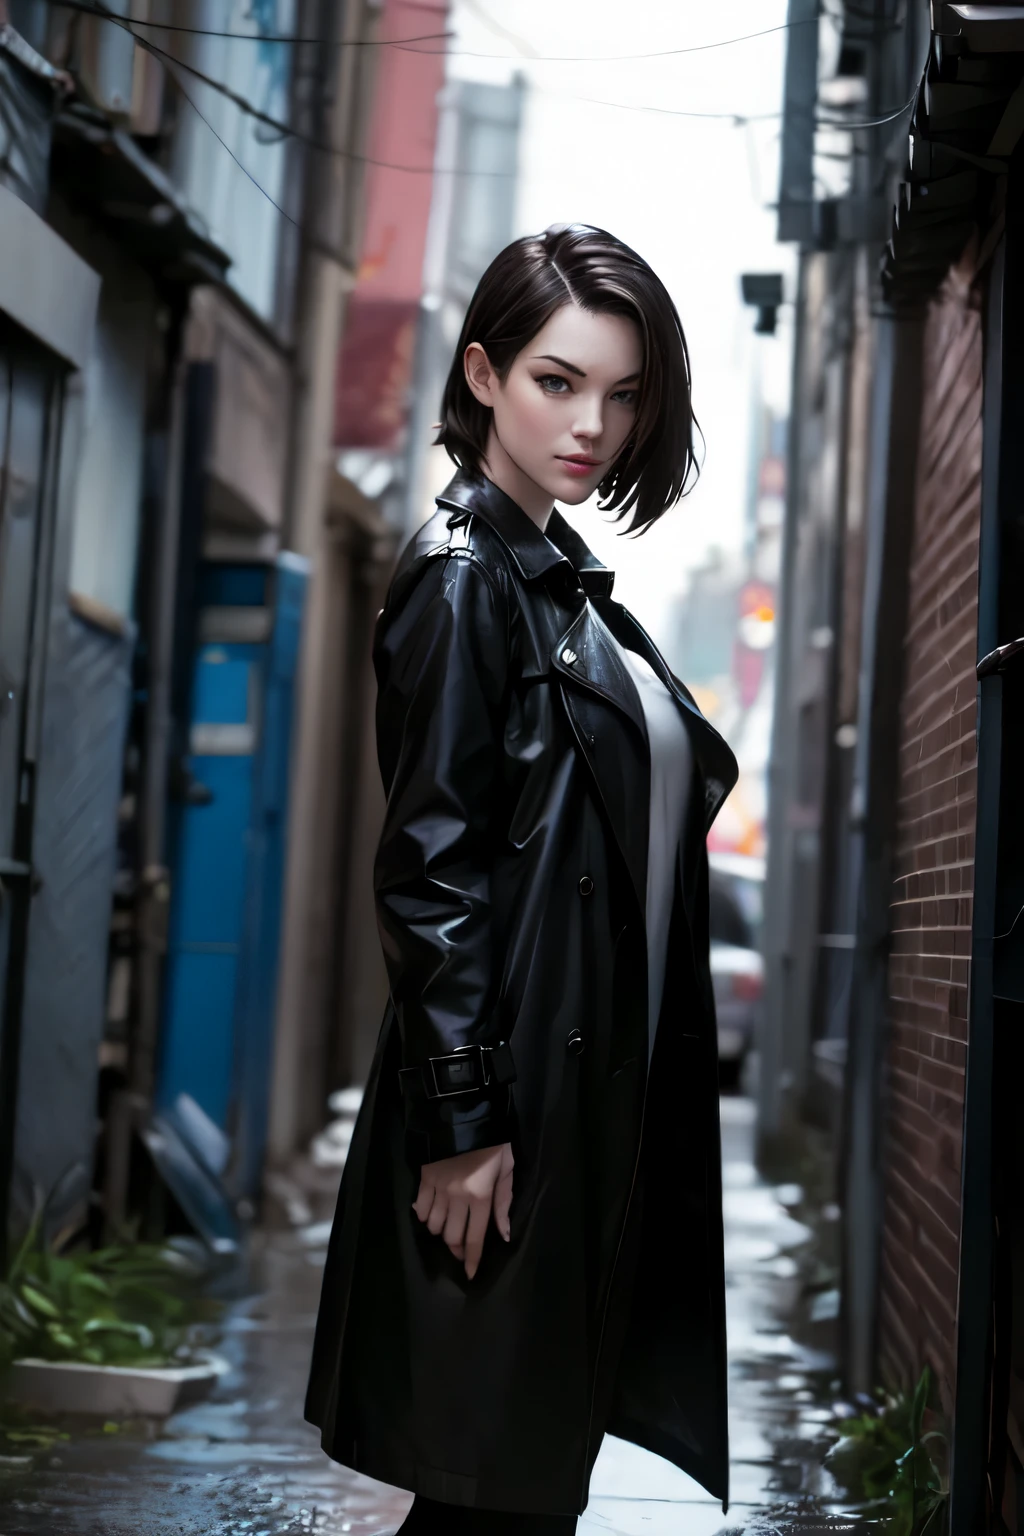 Stoya in a dark alley, her black trench coat billowing in the wind as she glances over her shoulder with a sly smile - a perfect film noir-style female  spy.